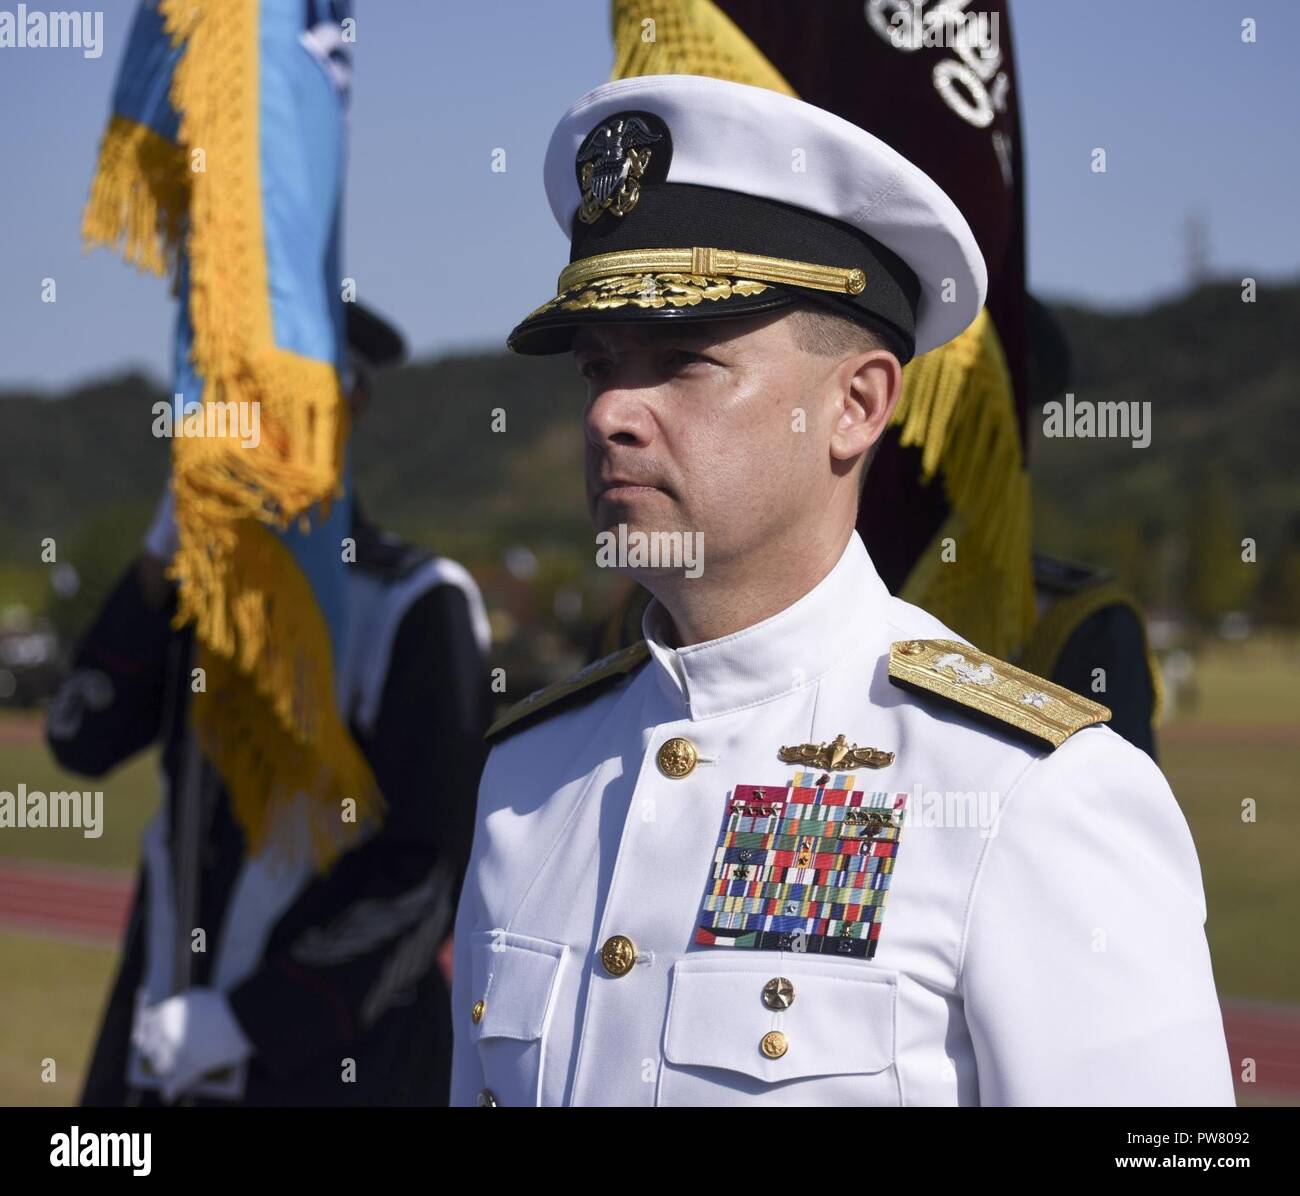 PYEONGTAEK, Republic of Korea (Sept. 28, 2017) Rear Adm. Brad Cooper, commander, Naval Forces Korea (CNFK) stands during the 69th annual ROK Armed Forces Day Ceremony. Armed Forces Day commemorates the service of men and women in the ROK armed forces, the day that South Korea broke through the 38th parallel during the Korean War in 1950. Cooper is also presented the Presidential Unit Citation by ROK President Moon, Jae-in, this is the first time a U.S. Navy command is presented this award since the end of the Korean War. Stock Photo